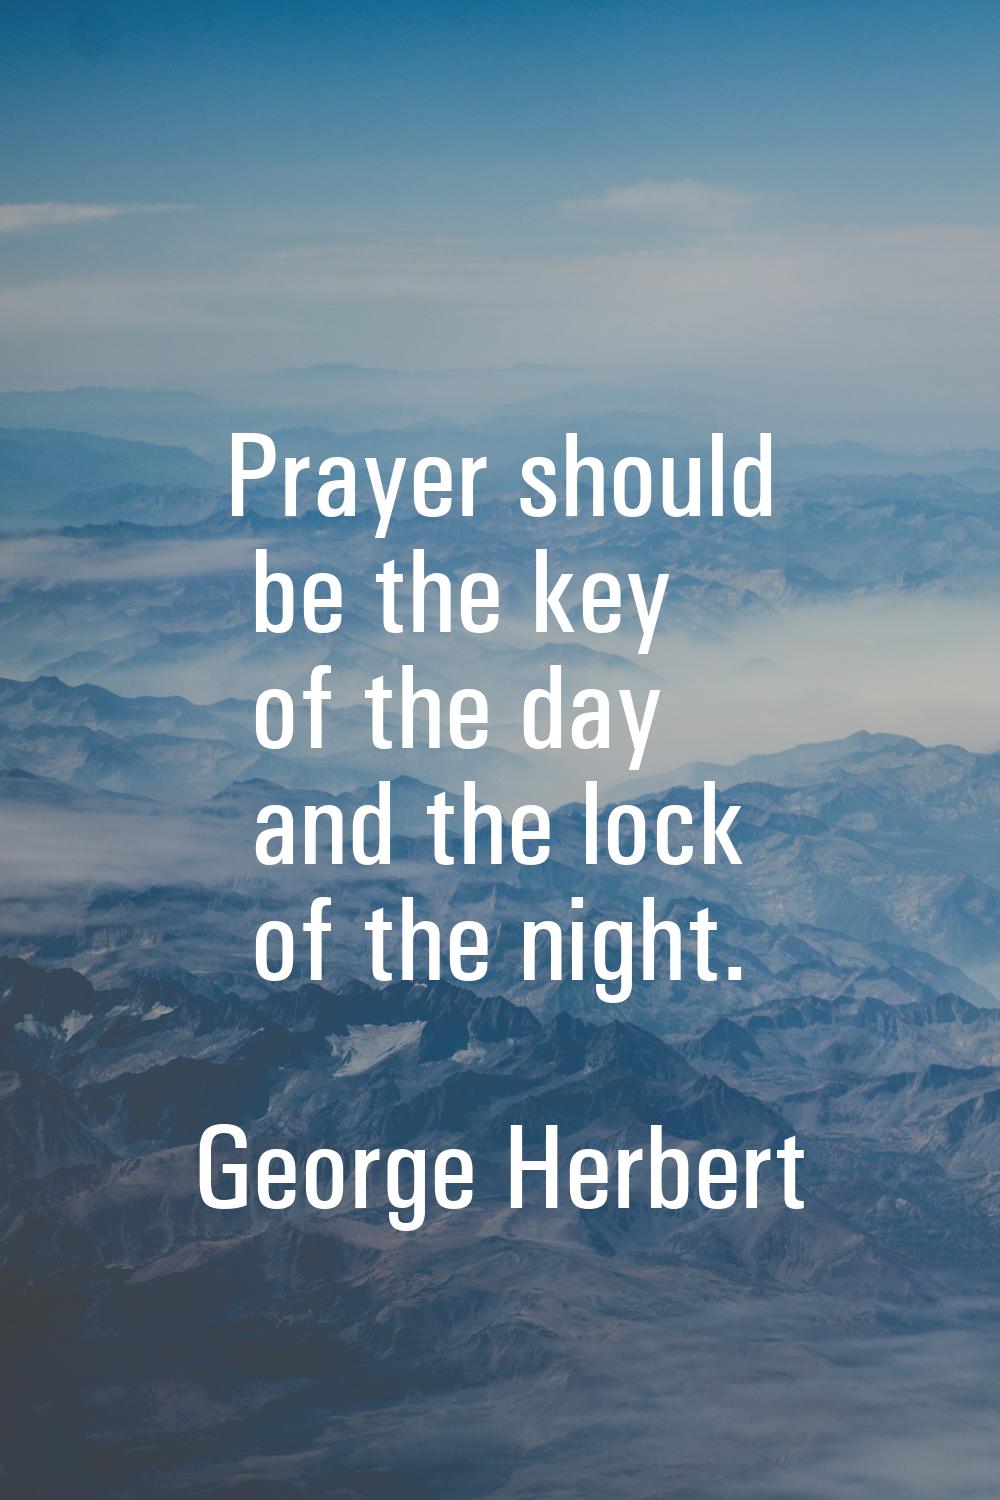 Prayer should be the key of the day and the lock of the night.